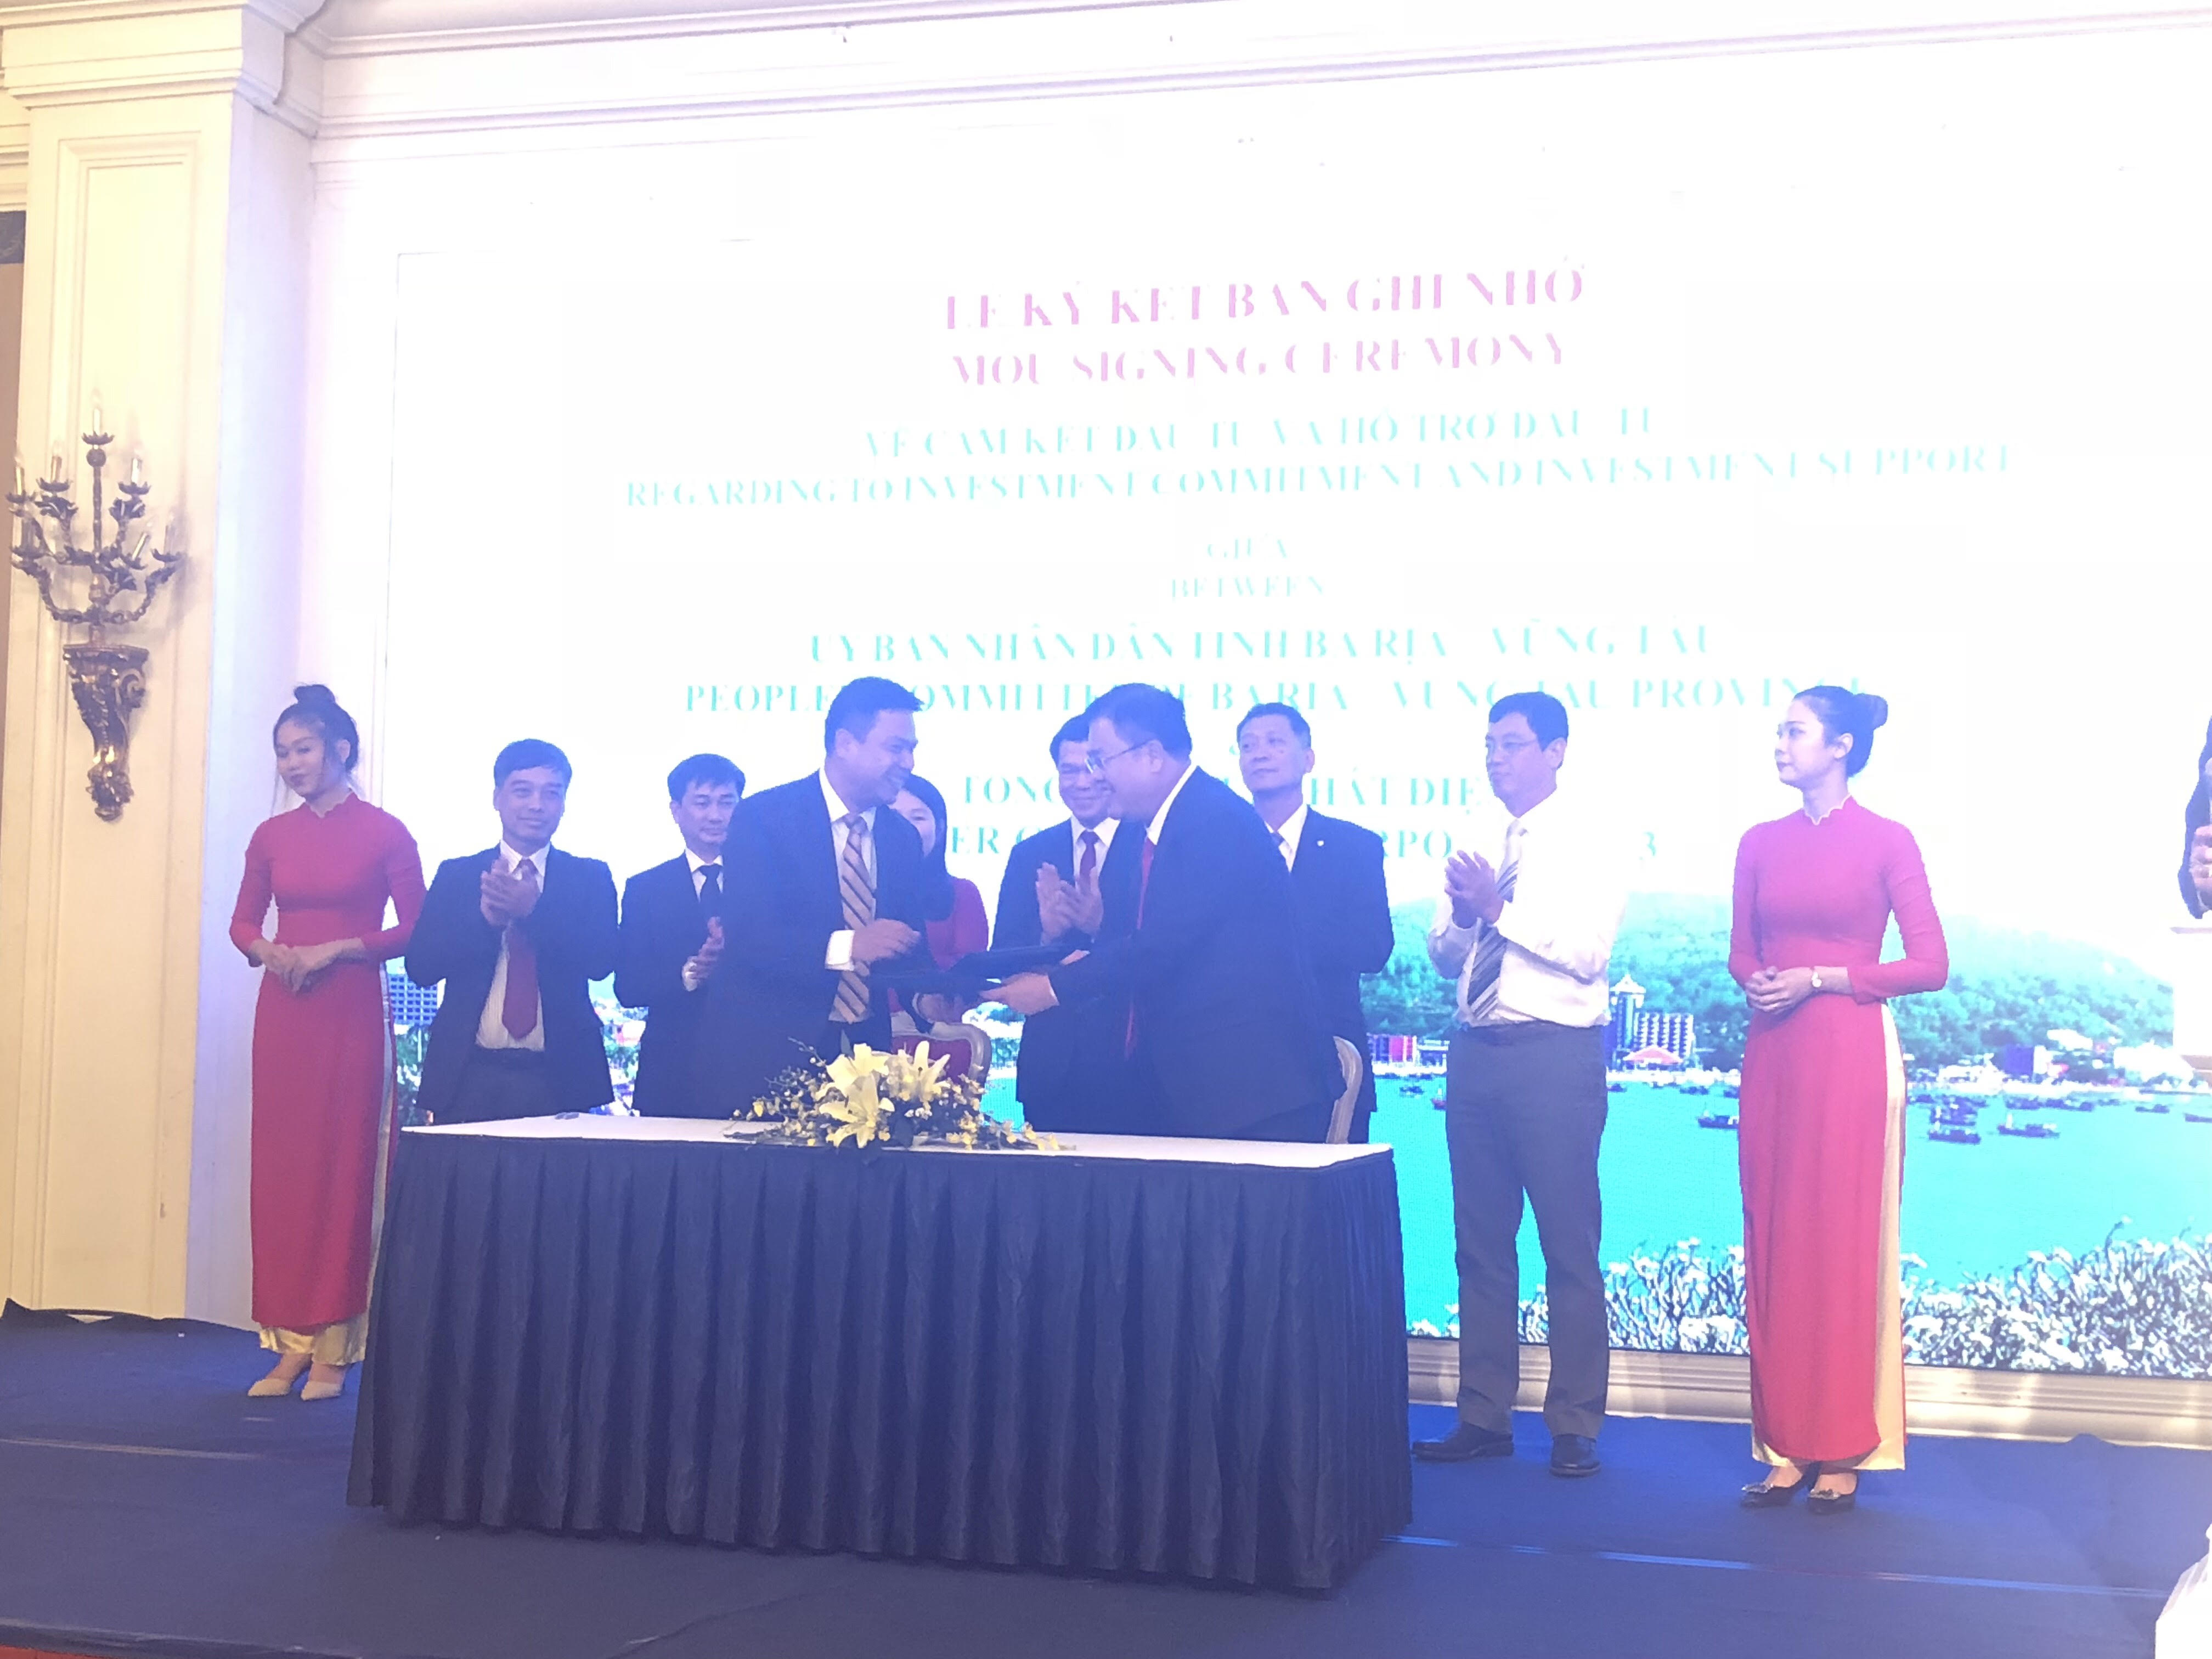 EVN and GENCO 3 invested $ 4.39 billion in a gas project in Ba Ria - Vung Tau